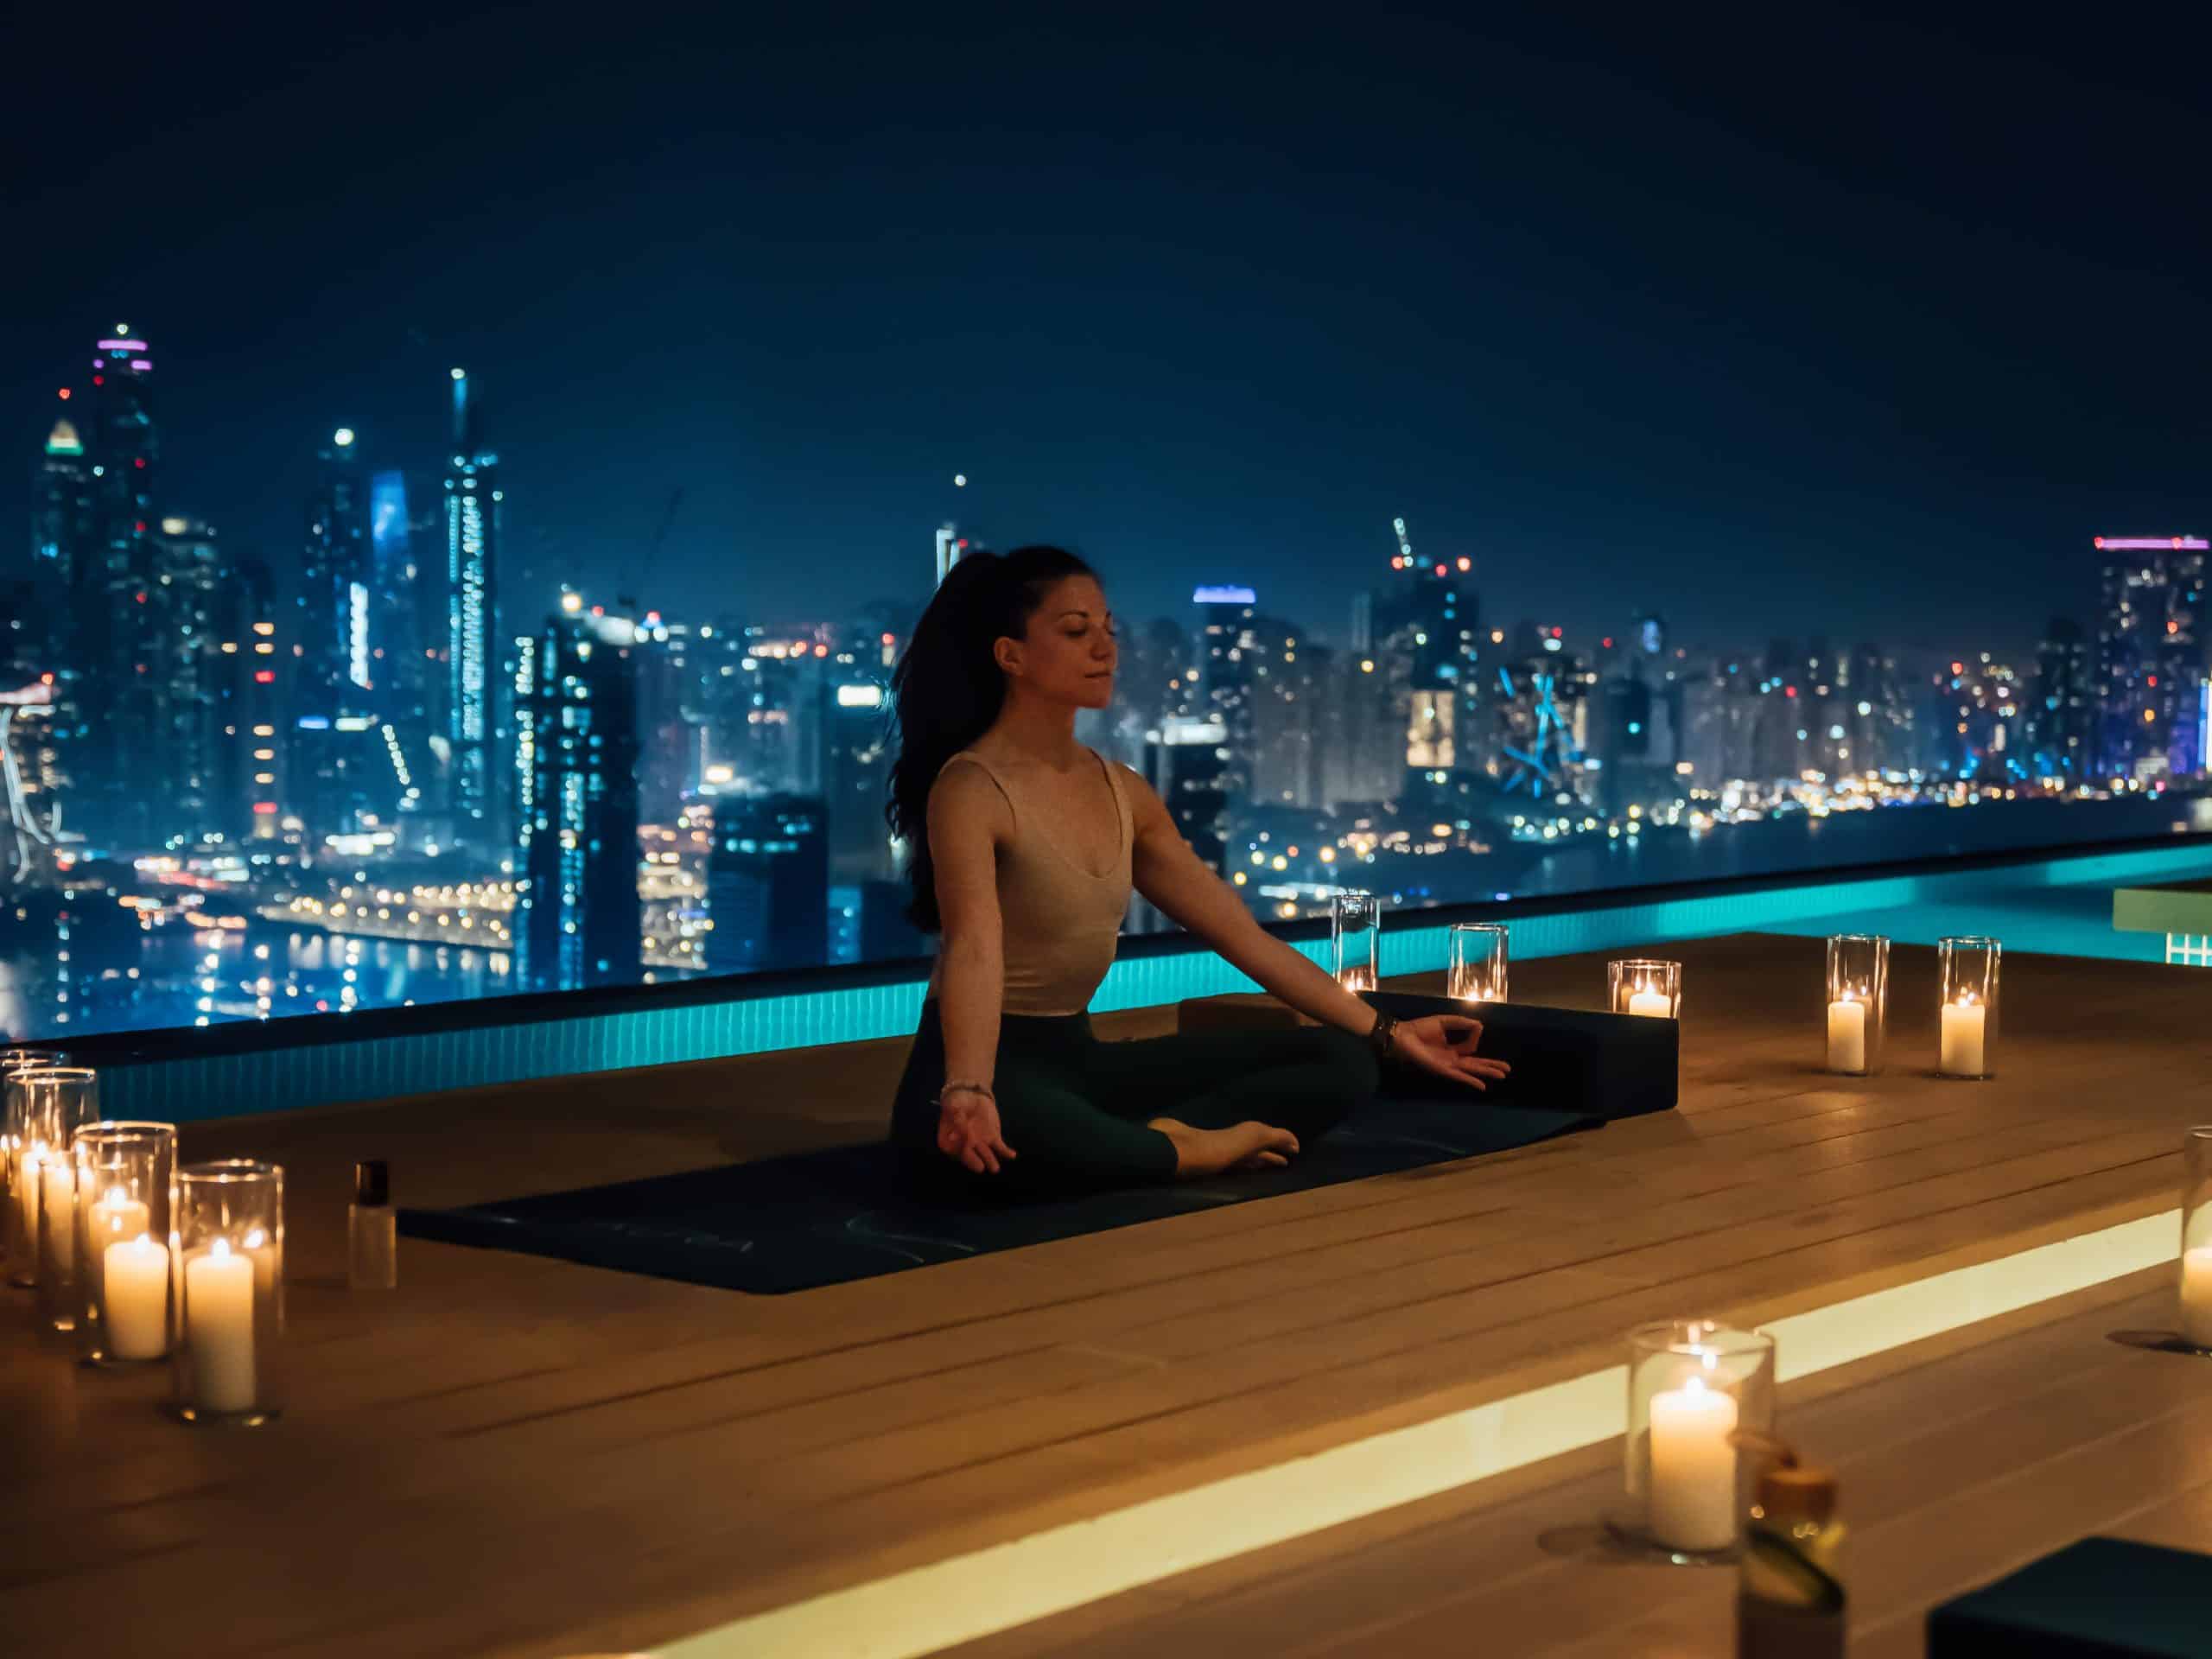 AURA SKYPOOL ANNOUNCES PLETHORA OF INNOVATIVE ACTIVATIONS THIS APRIL